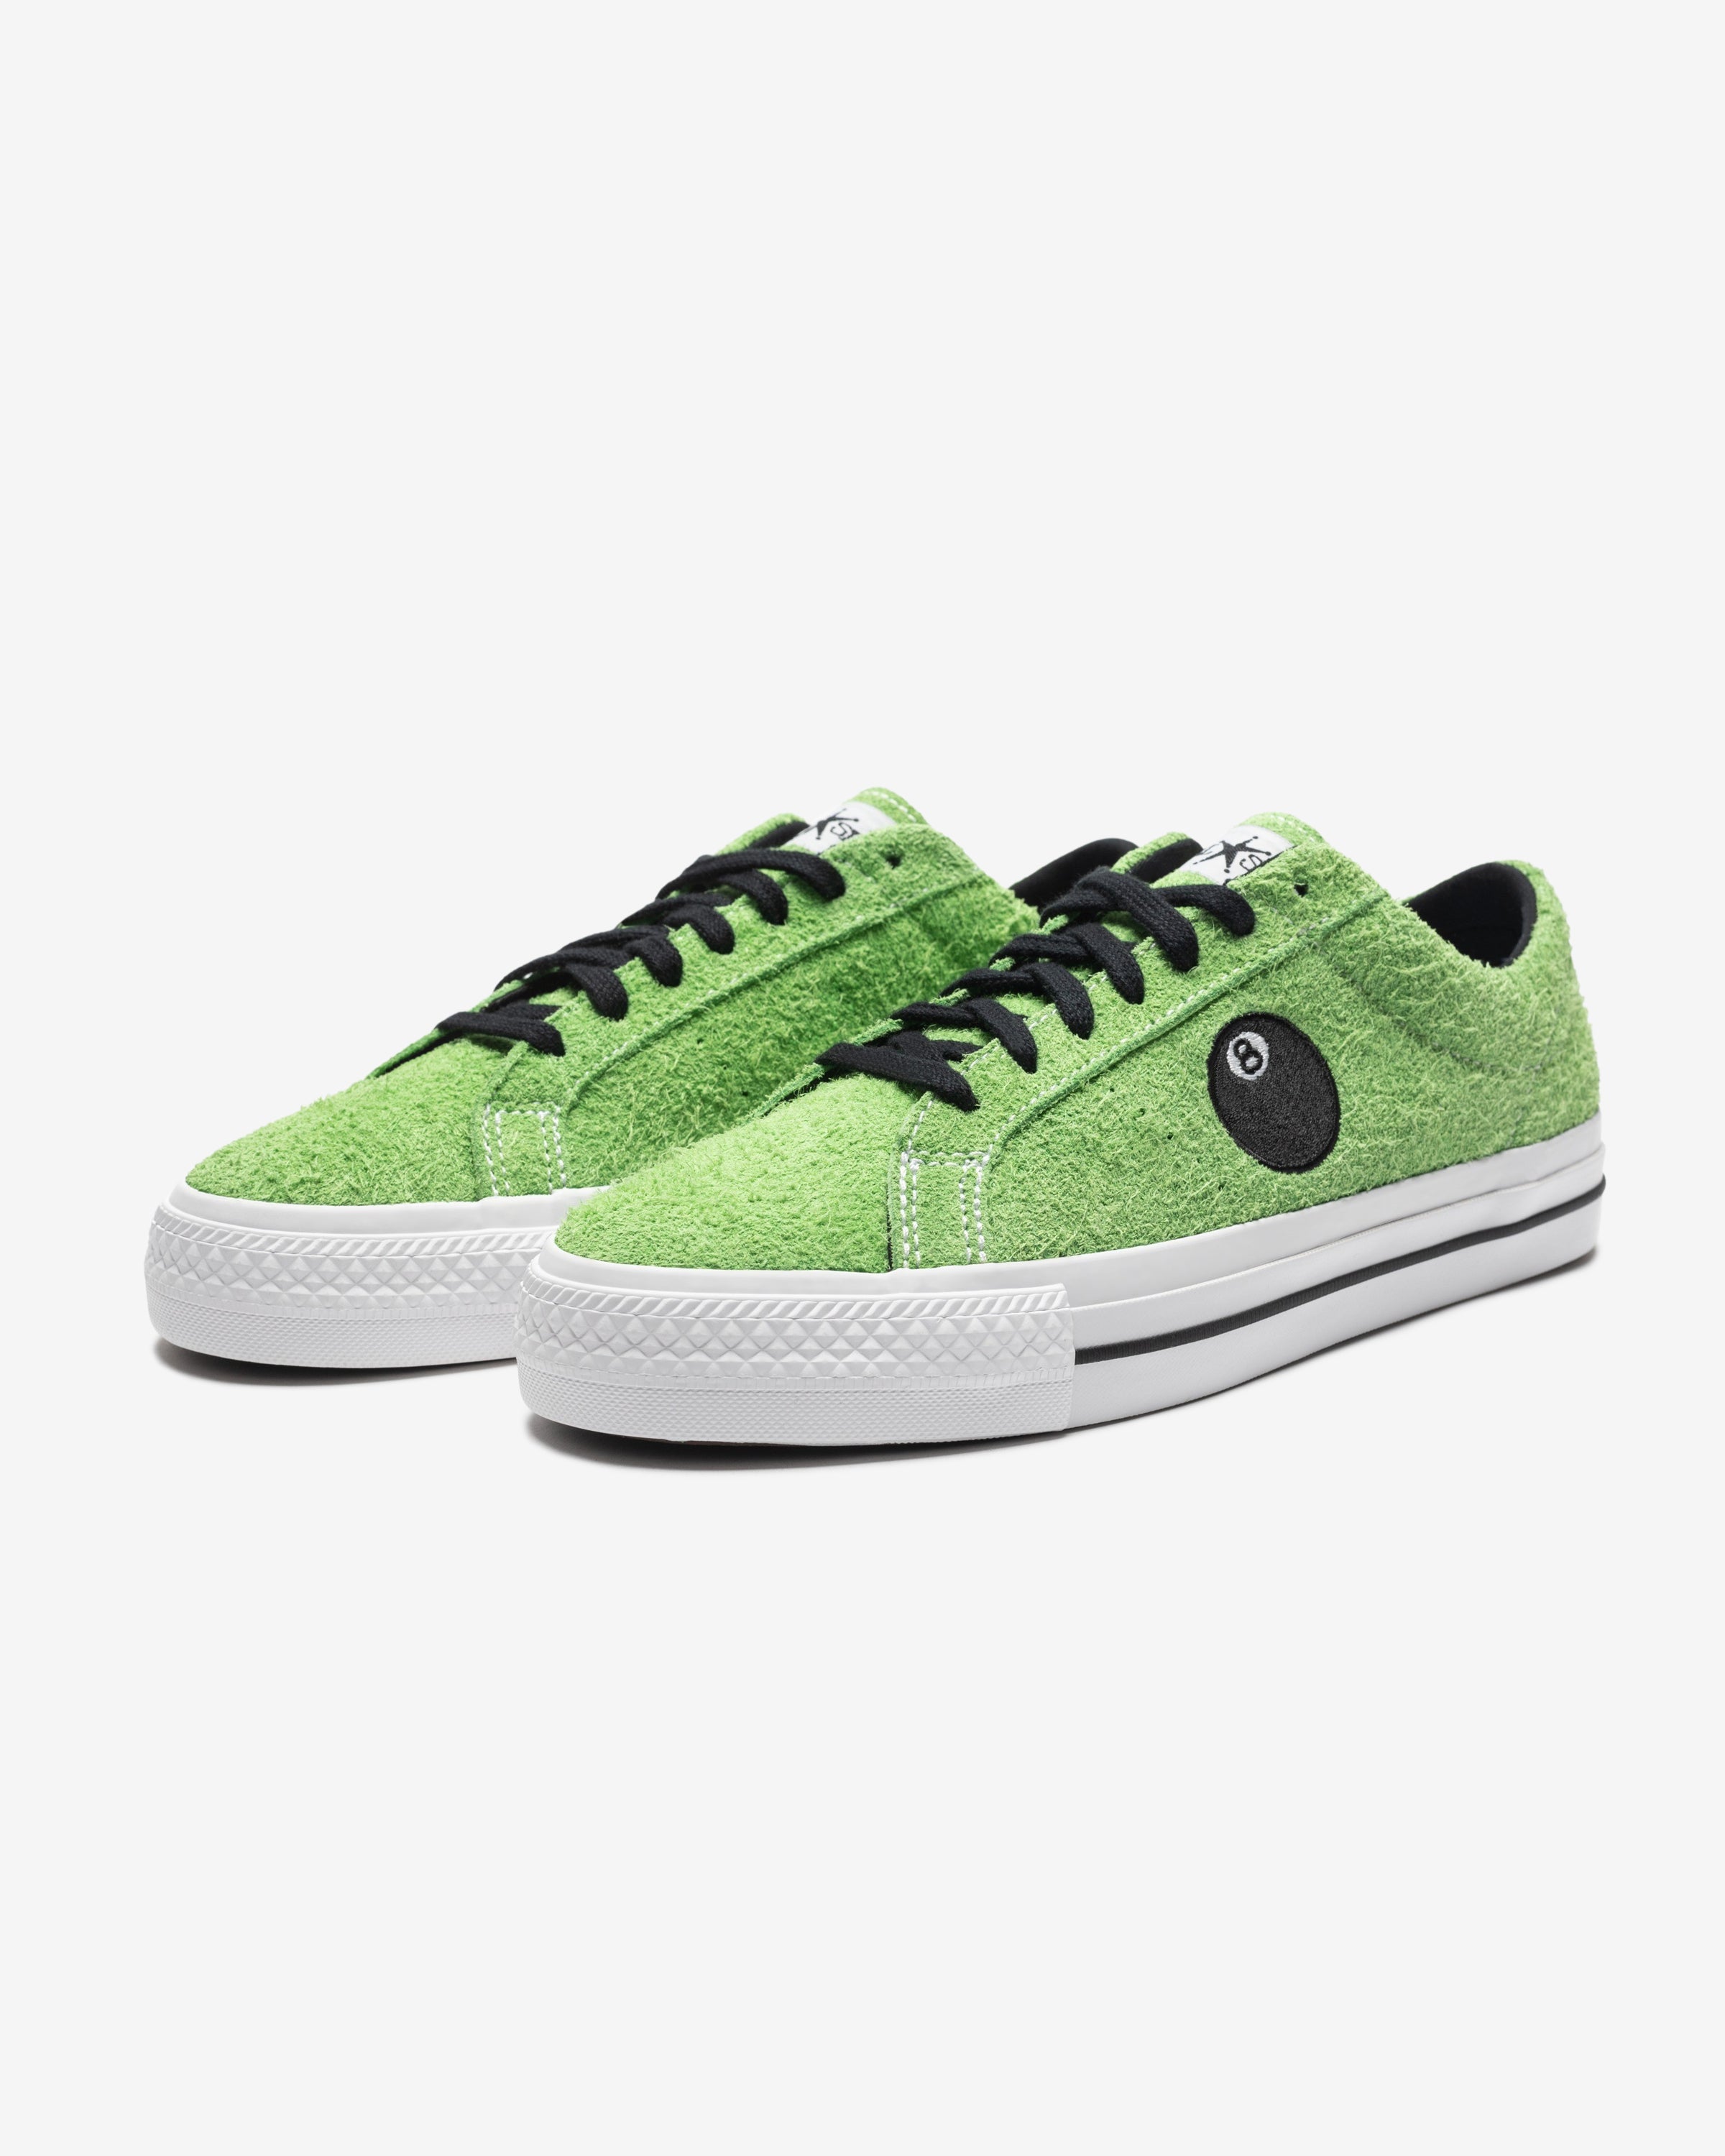 CONVERSE X STUSSY ONE STAR - GREENFLASH/ WHITE/ BLACK – Undefeated